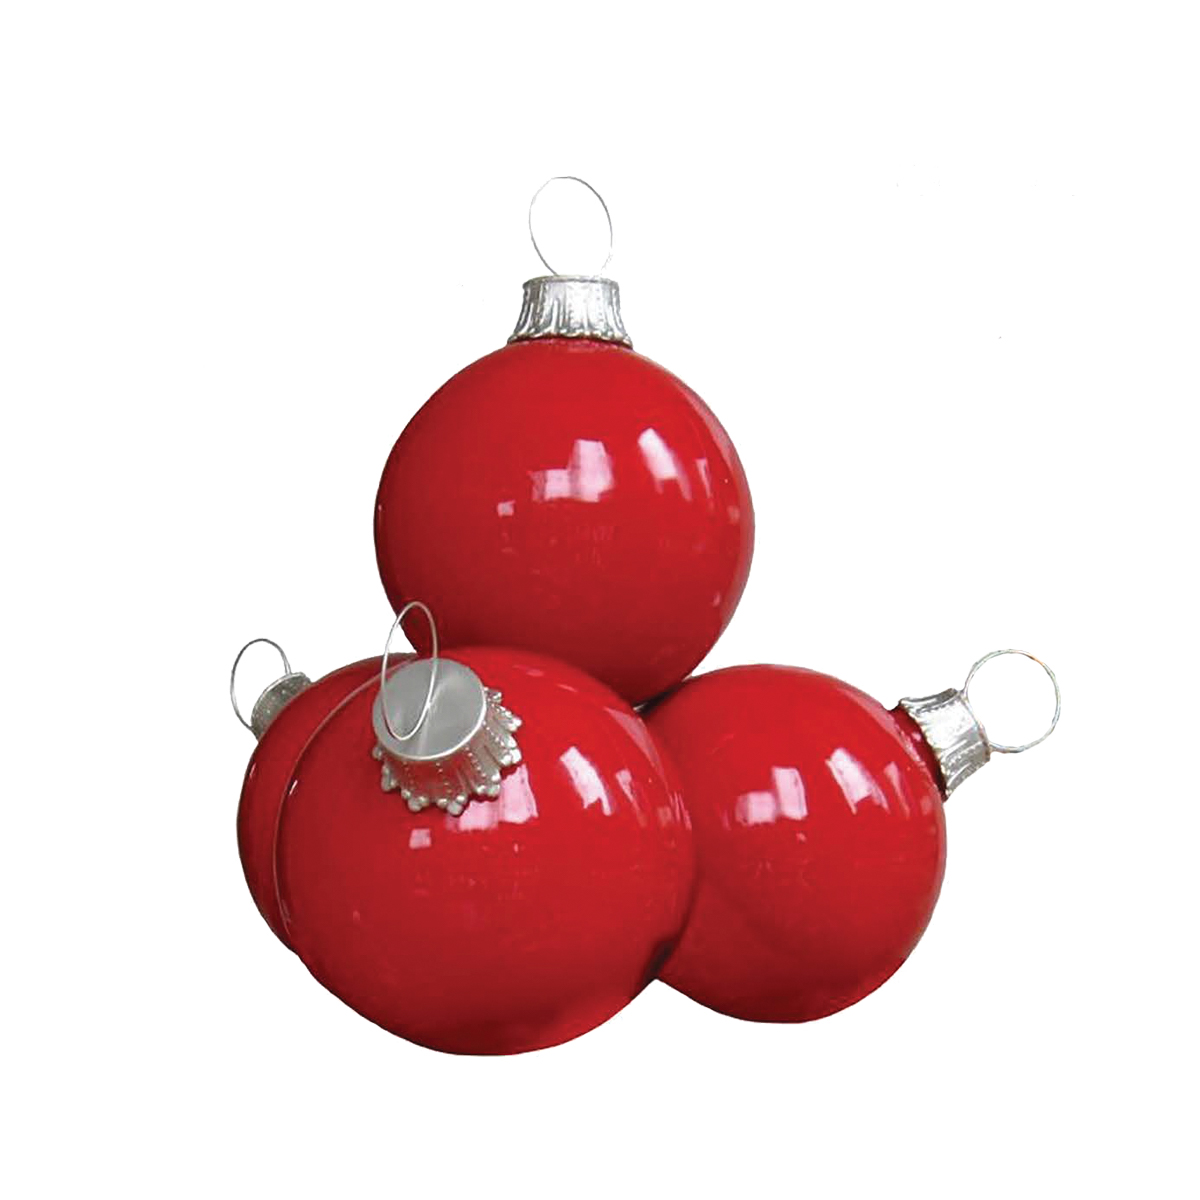 Christmas Decorations - 4 Bauble Stack - 3ft Tall